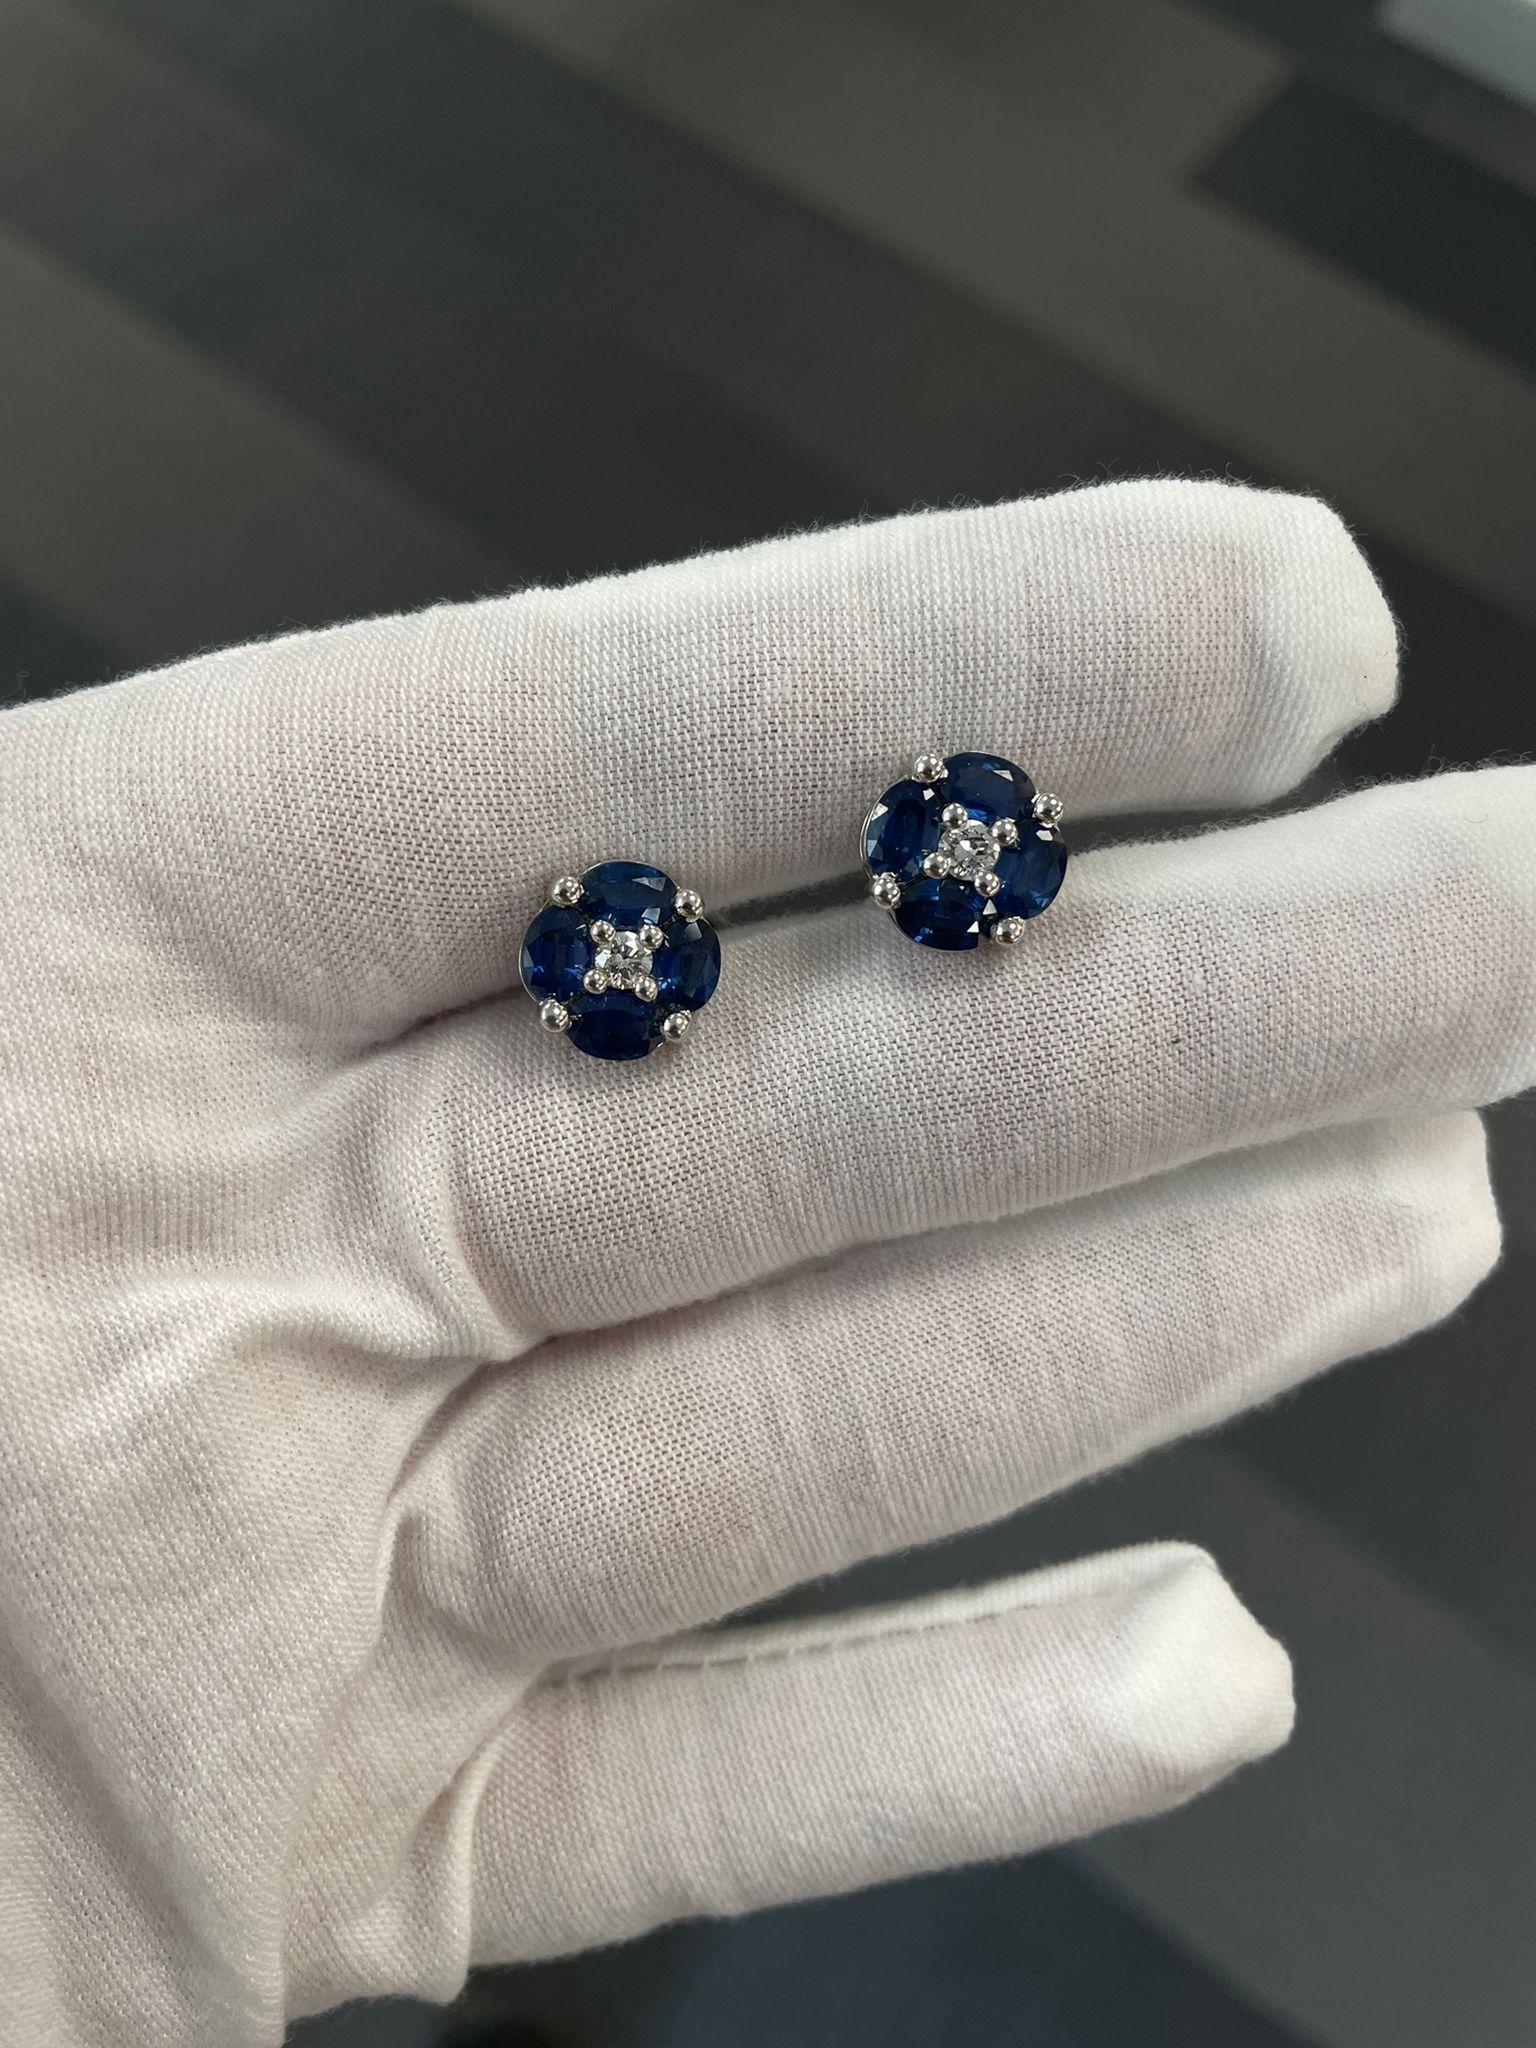 Andreoli 4.45 Carat Blue Sapphire 18 Karat White Gold Cufflinks In New Condition For Sale In New York, NY